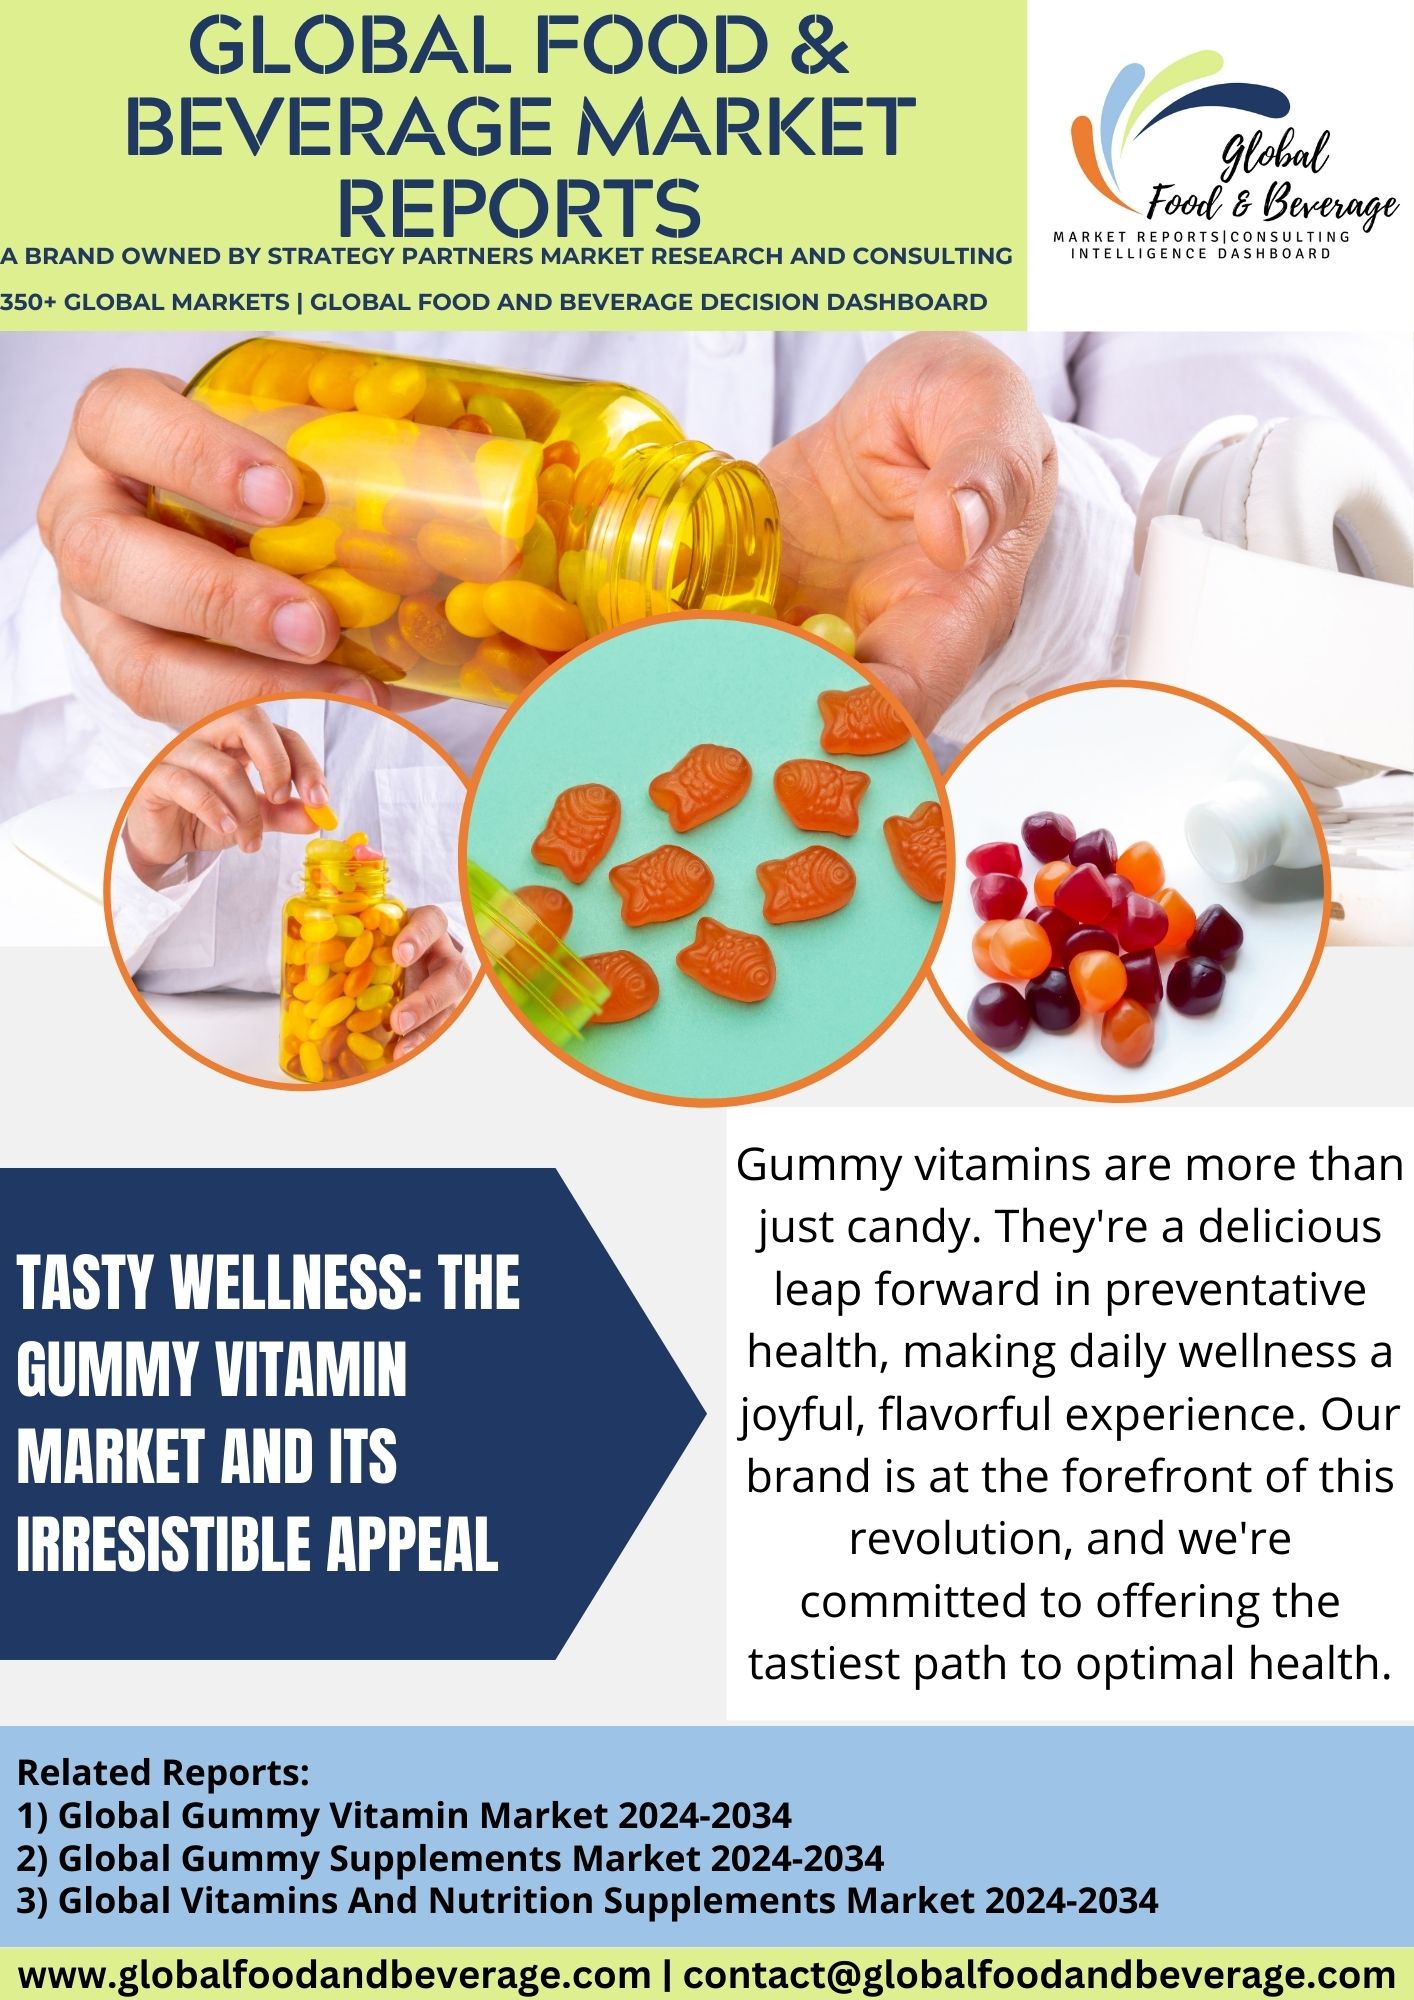 The Gummy Vitamin Market and Its Irresistible Appeal